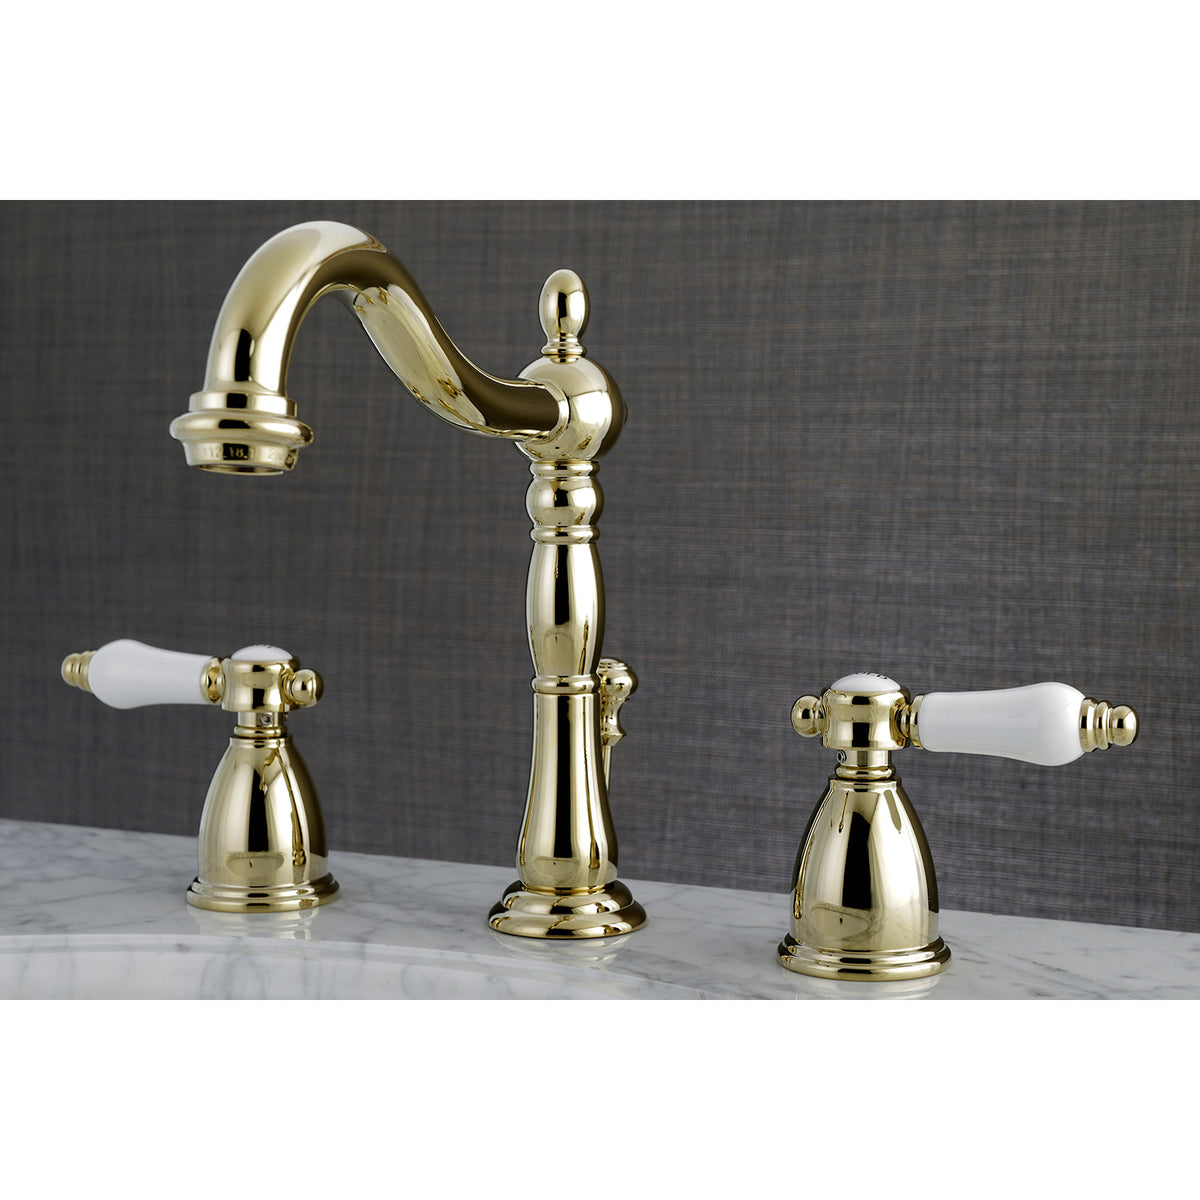 Bel-Air 8 inch Widespread 2-Handle Bathroom Faucet in Polished Brass